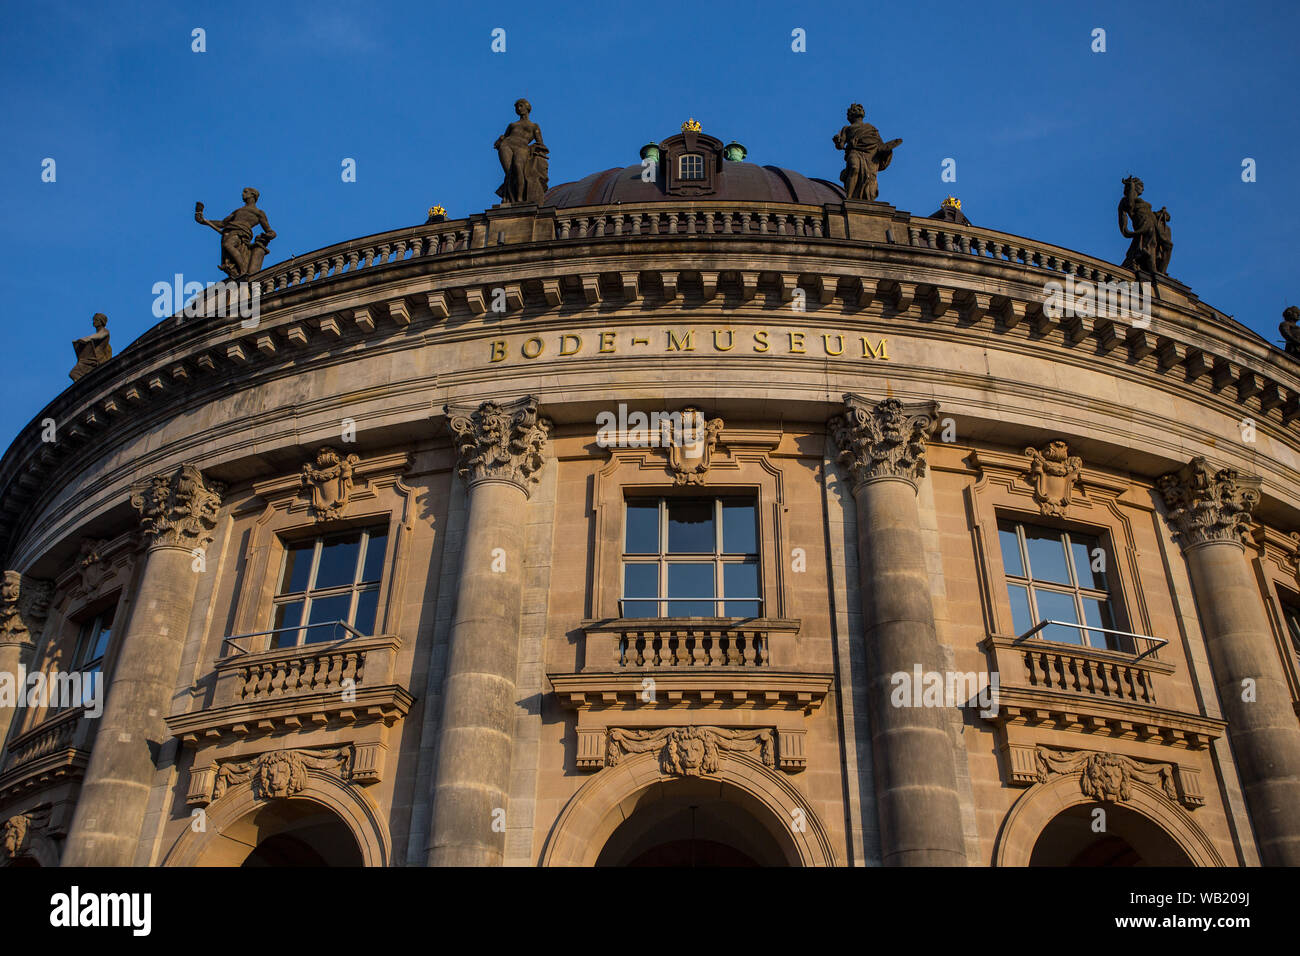 Bode-Museum at the centre of Berlin Stock Photo